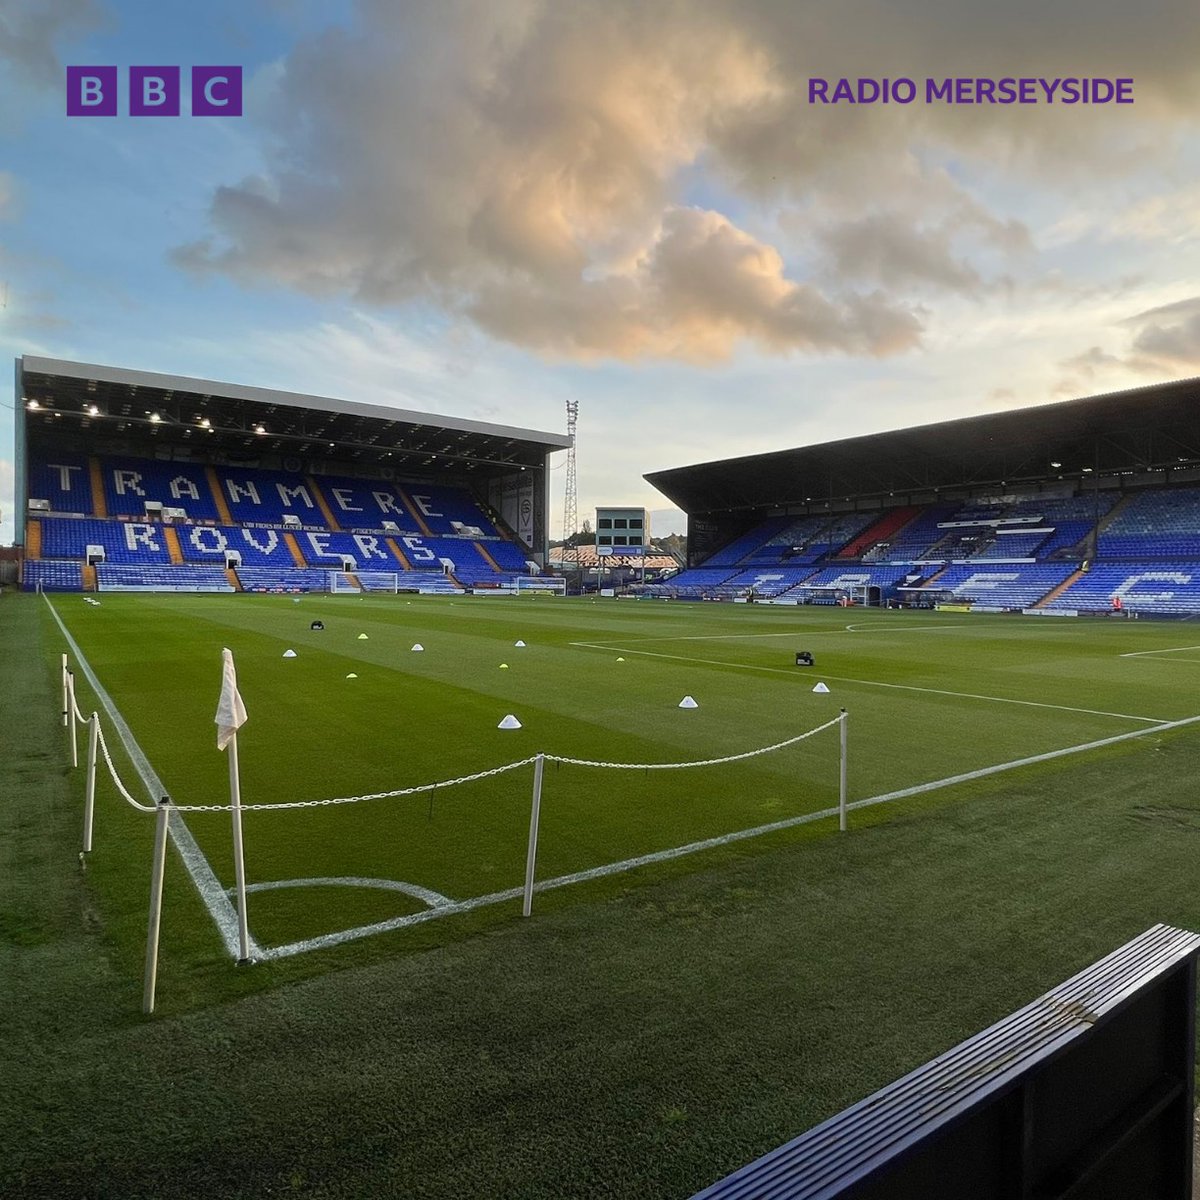 ⚪️ #TRFC launch a ‘Path to Pro’ Esports competition for a professional Esports deal with the club 🎮 Two qualifying tournaments will be held online on 1st & 8th June with an online semi-final on 15th June. The finals will be held on 22nd June at Prenton Park #⃣ #SWA #TotalSport